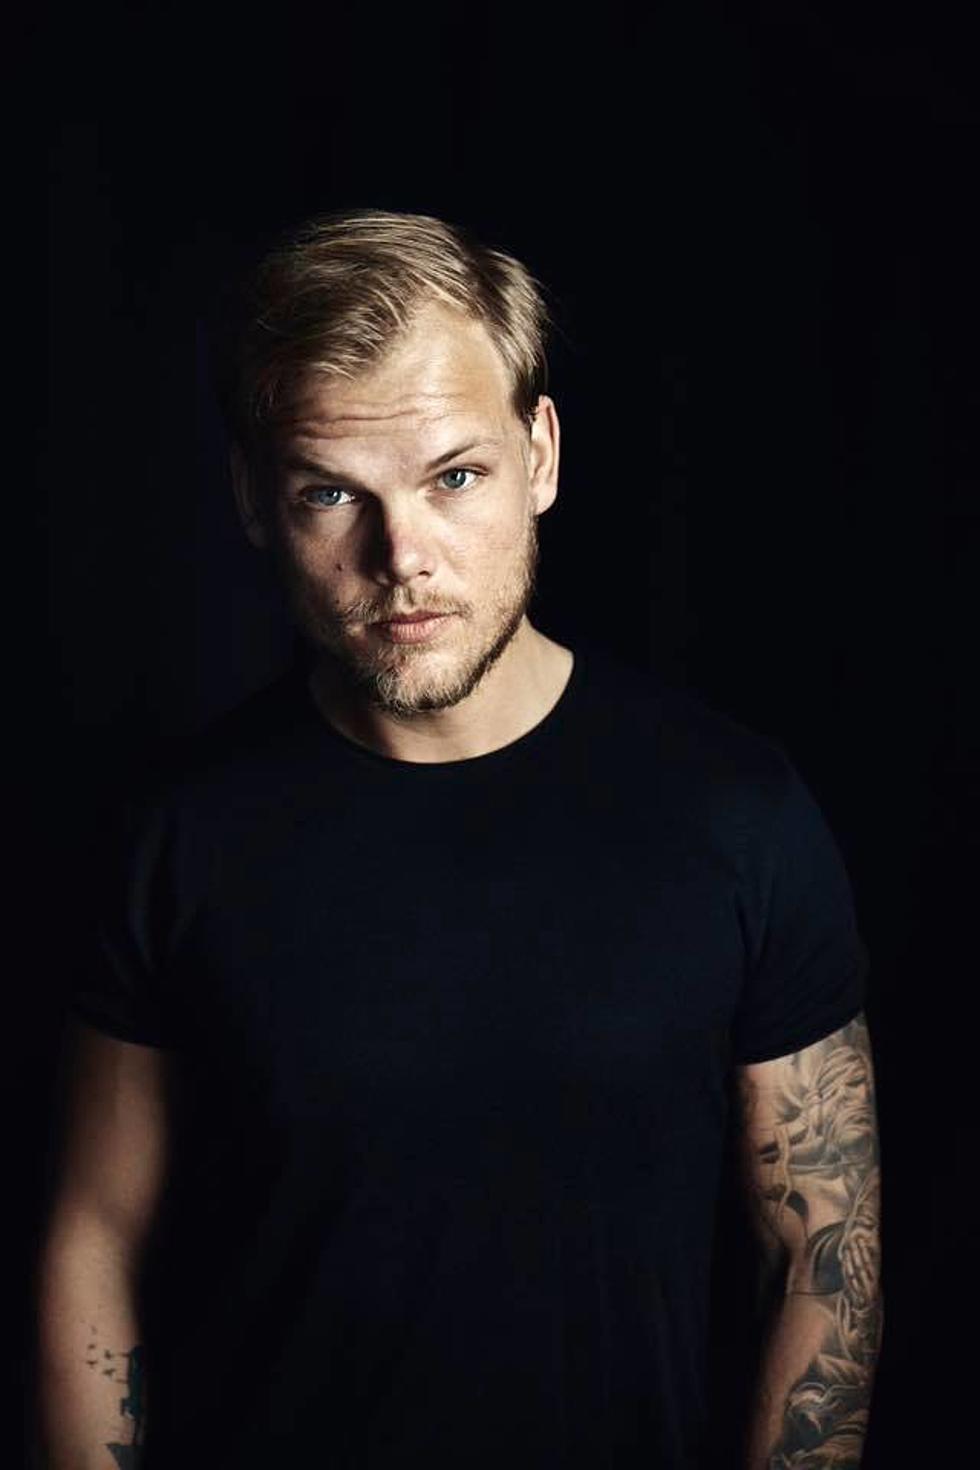 Avicii reportedly died by suicide due to self-inflicted wounds, blood loss